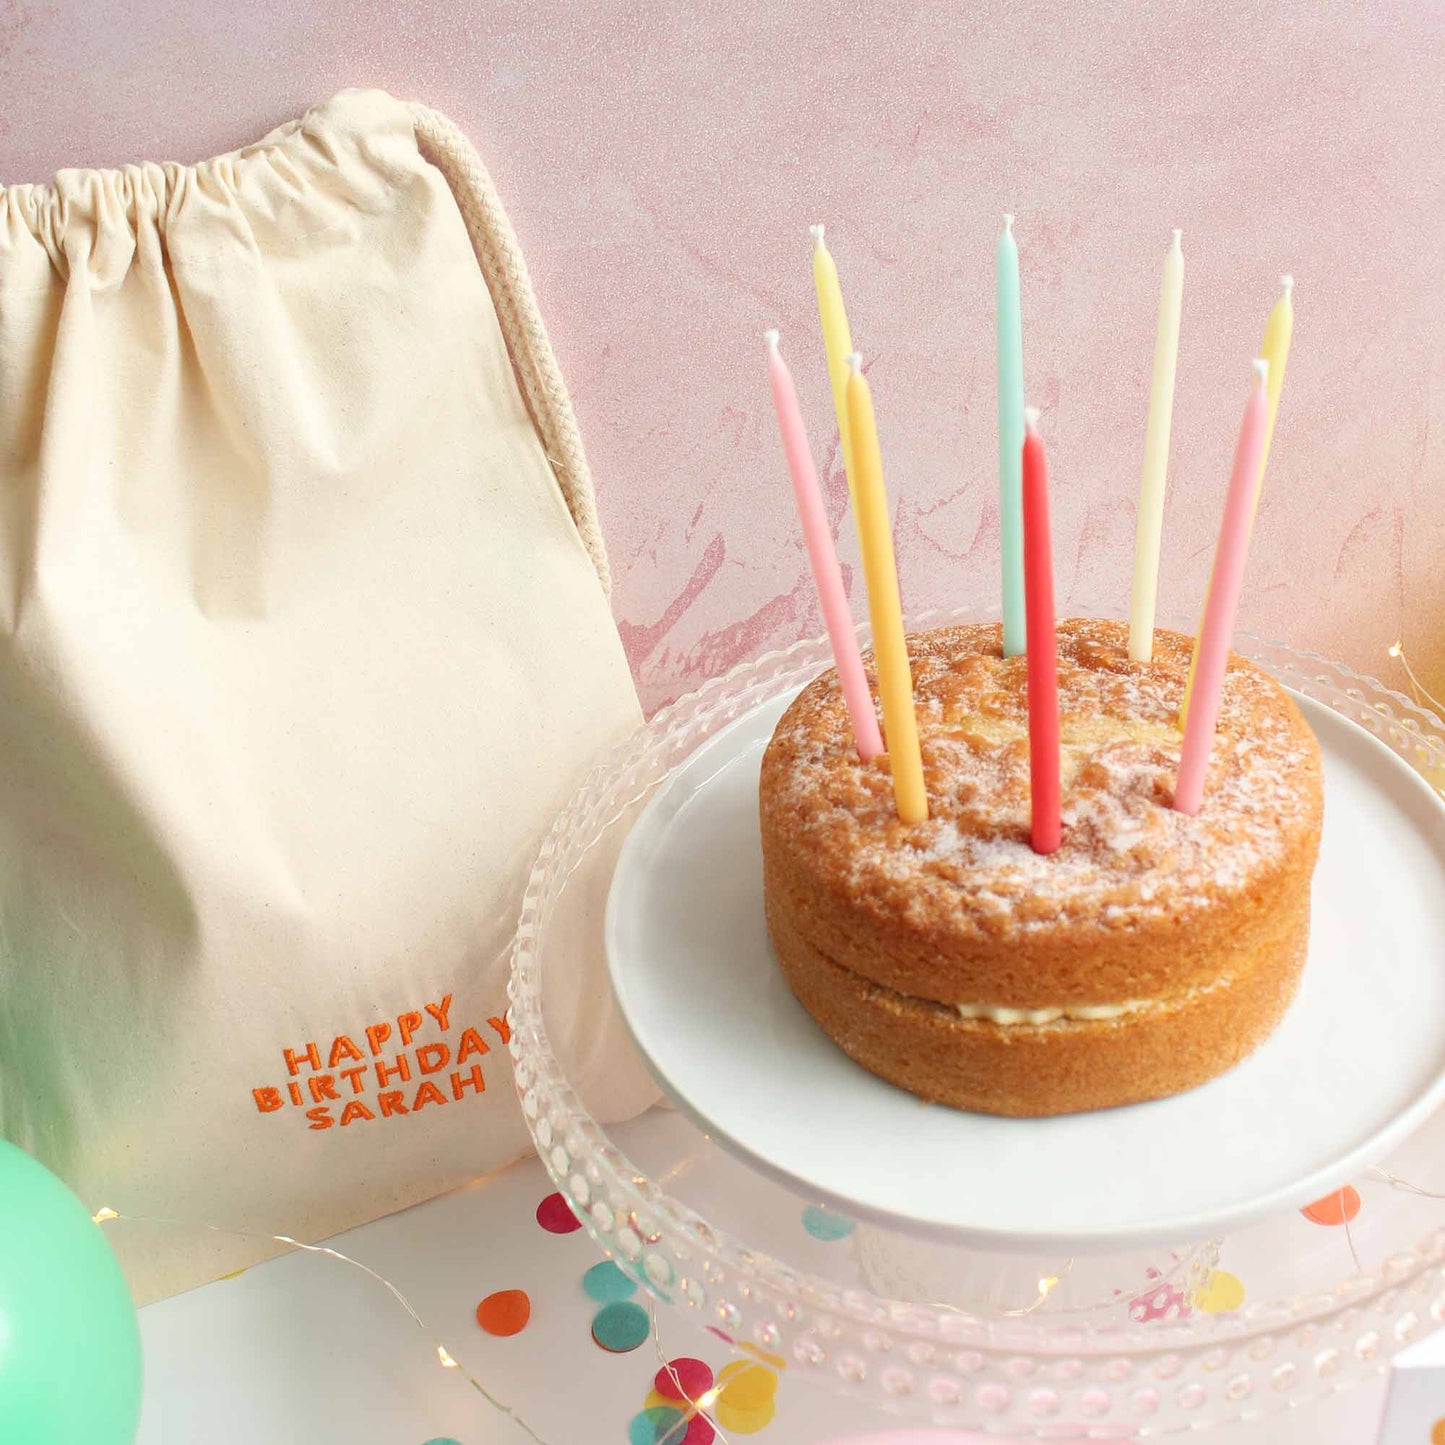 Beeswax Birthday Candles - Sunset Mix